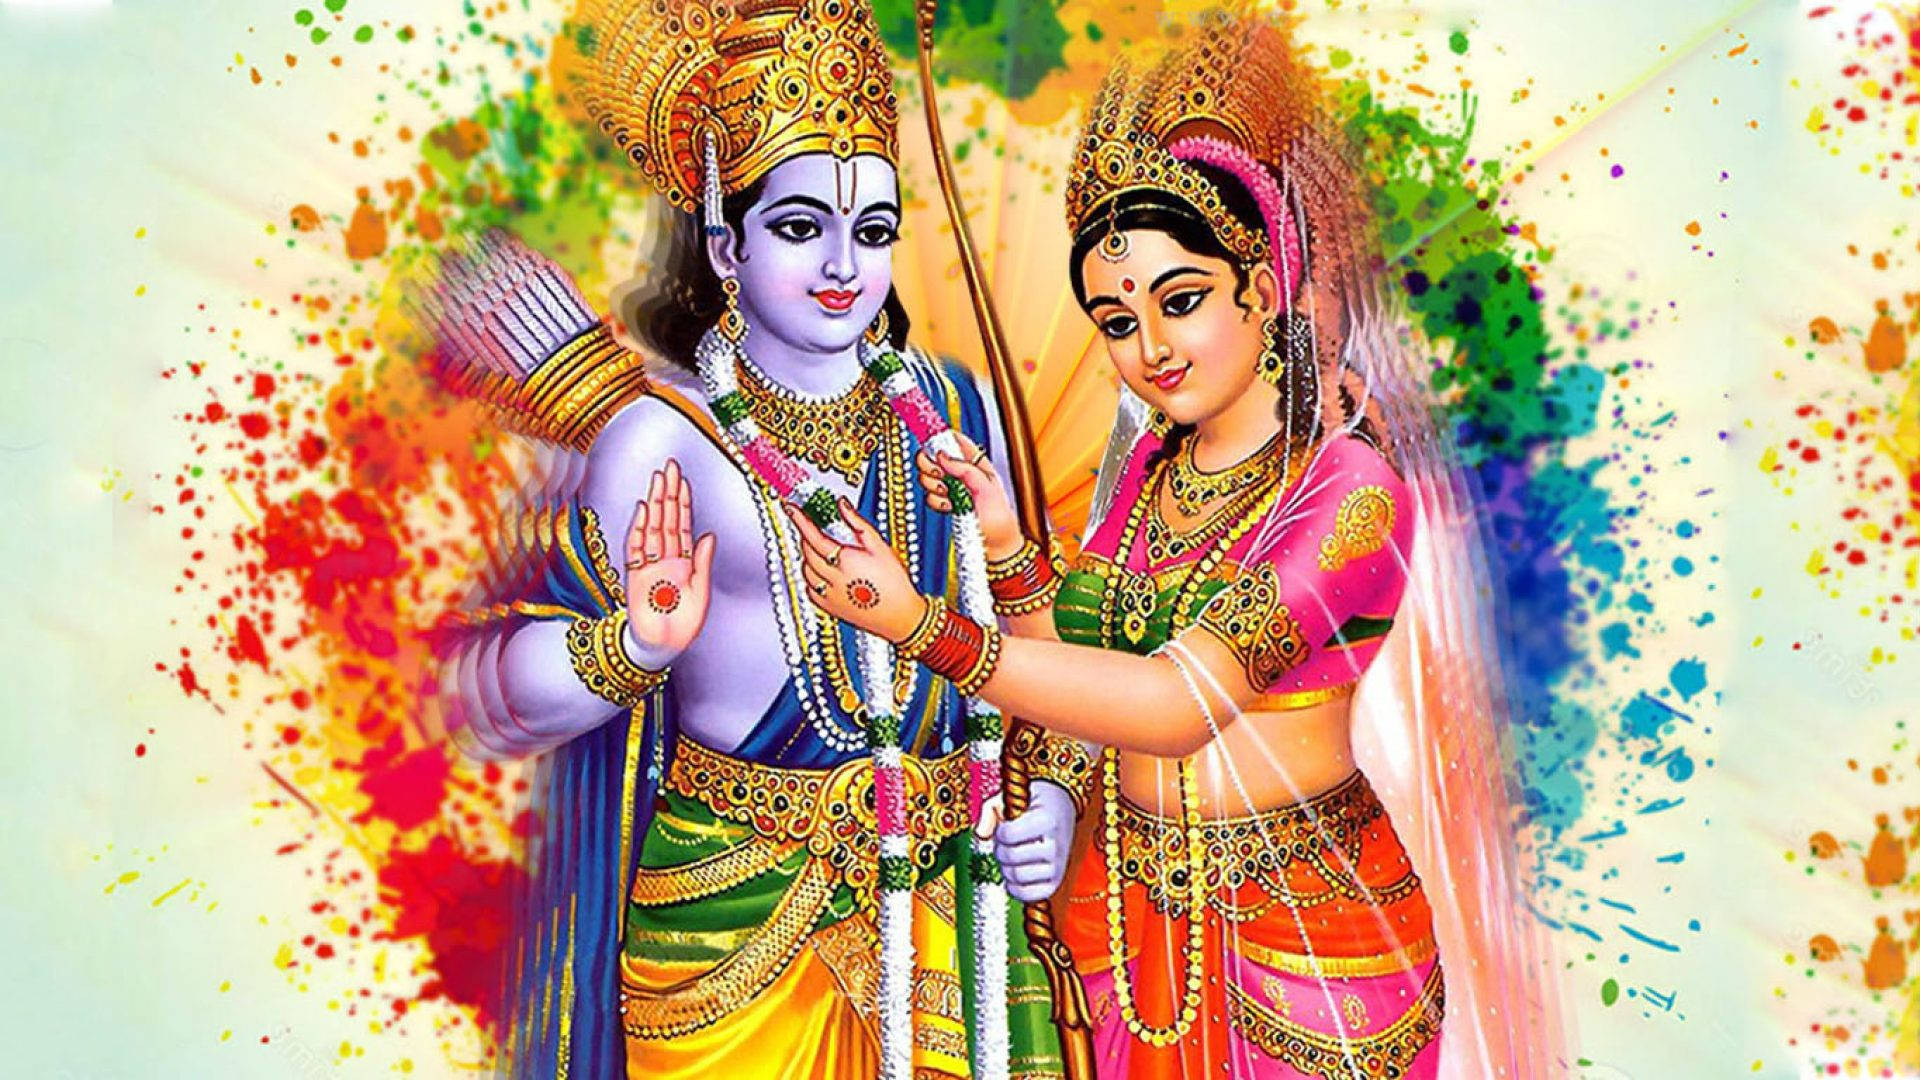 "Divine Union - Colorfully Painted Art of Ram and Sita" Wallpaper